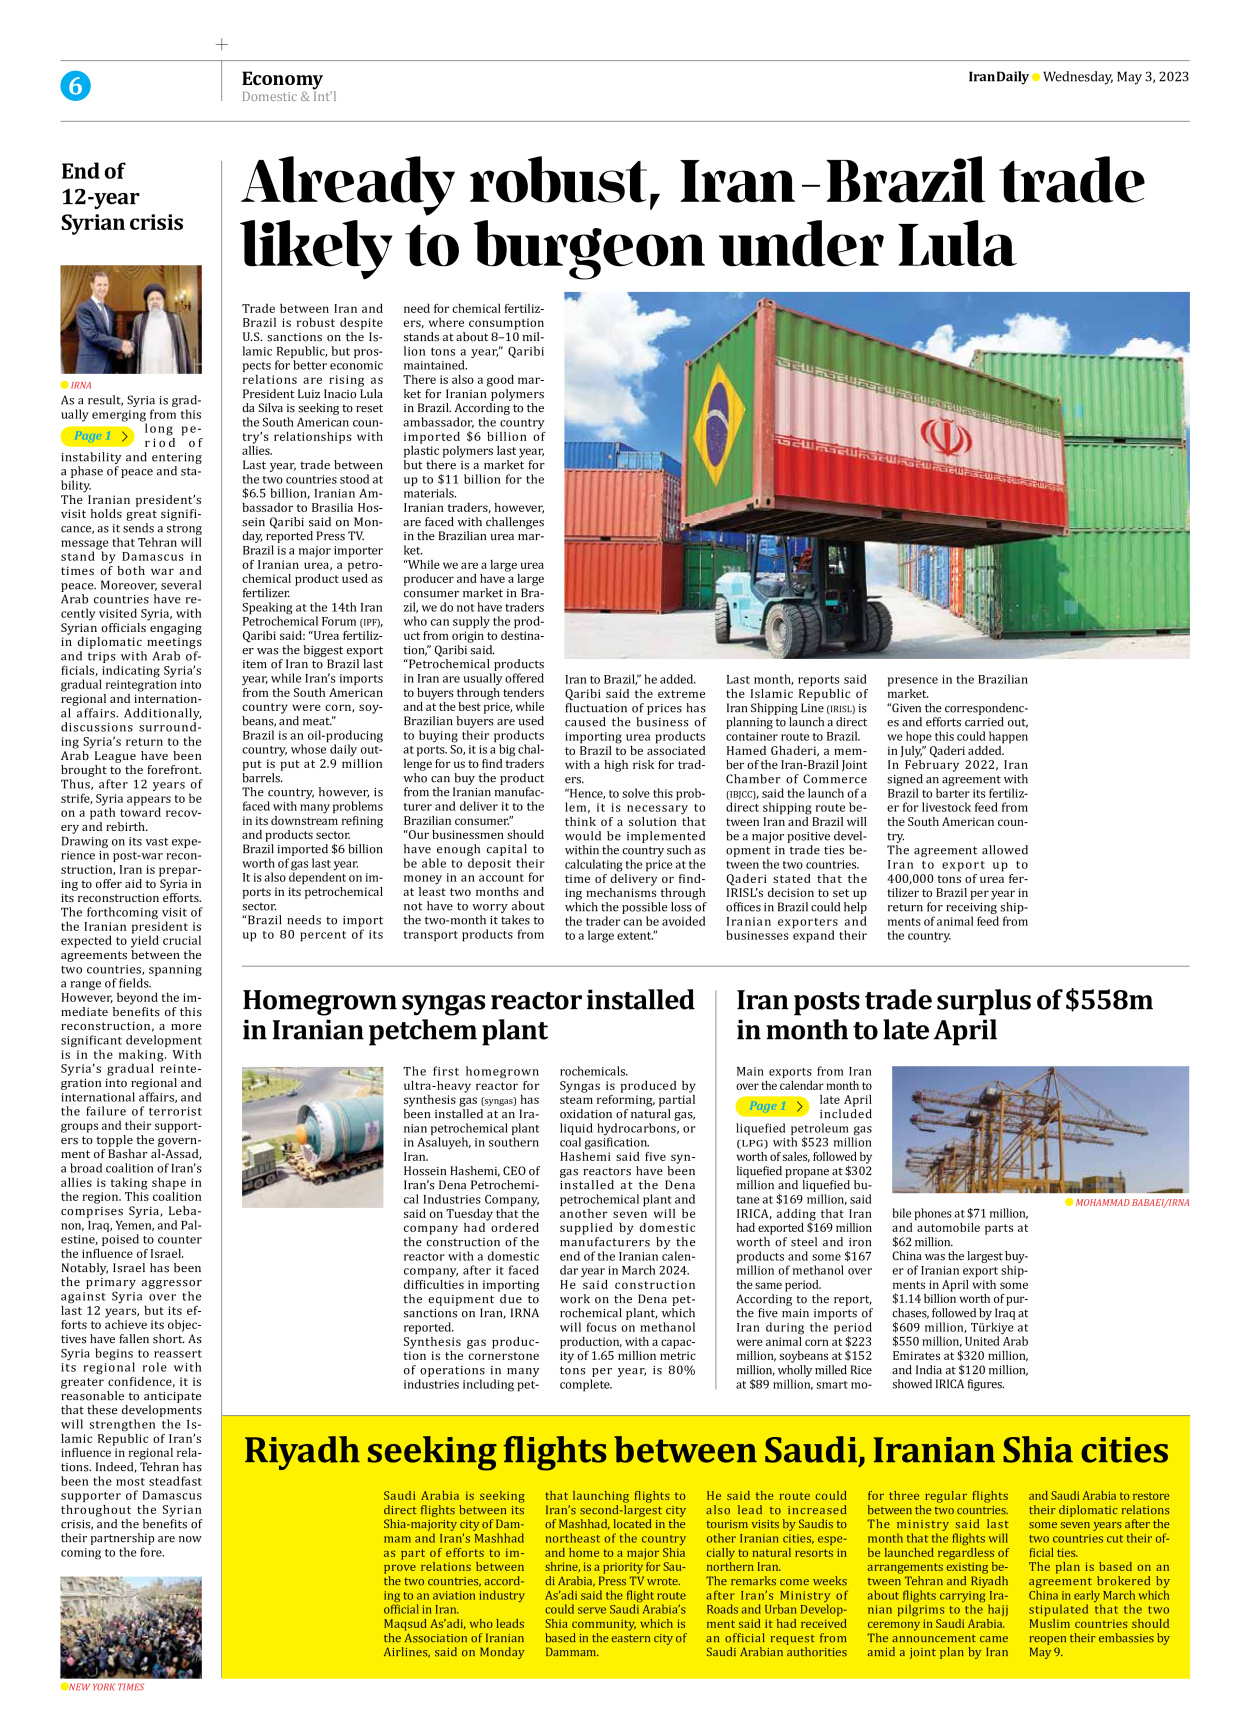 Iran Daily - Number Seven Thousand Two Hundred and Eighty Two - 03 May 2023 - Page 6